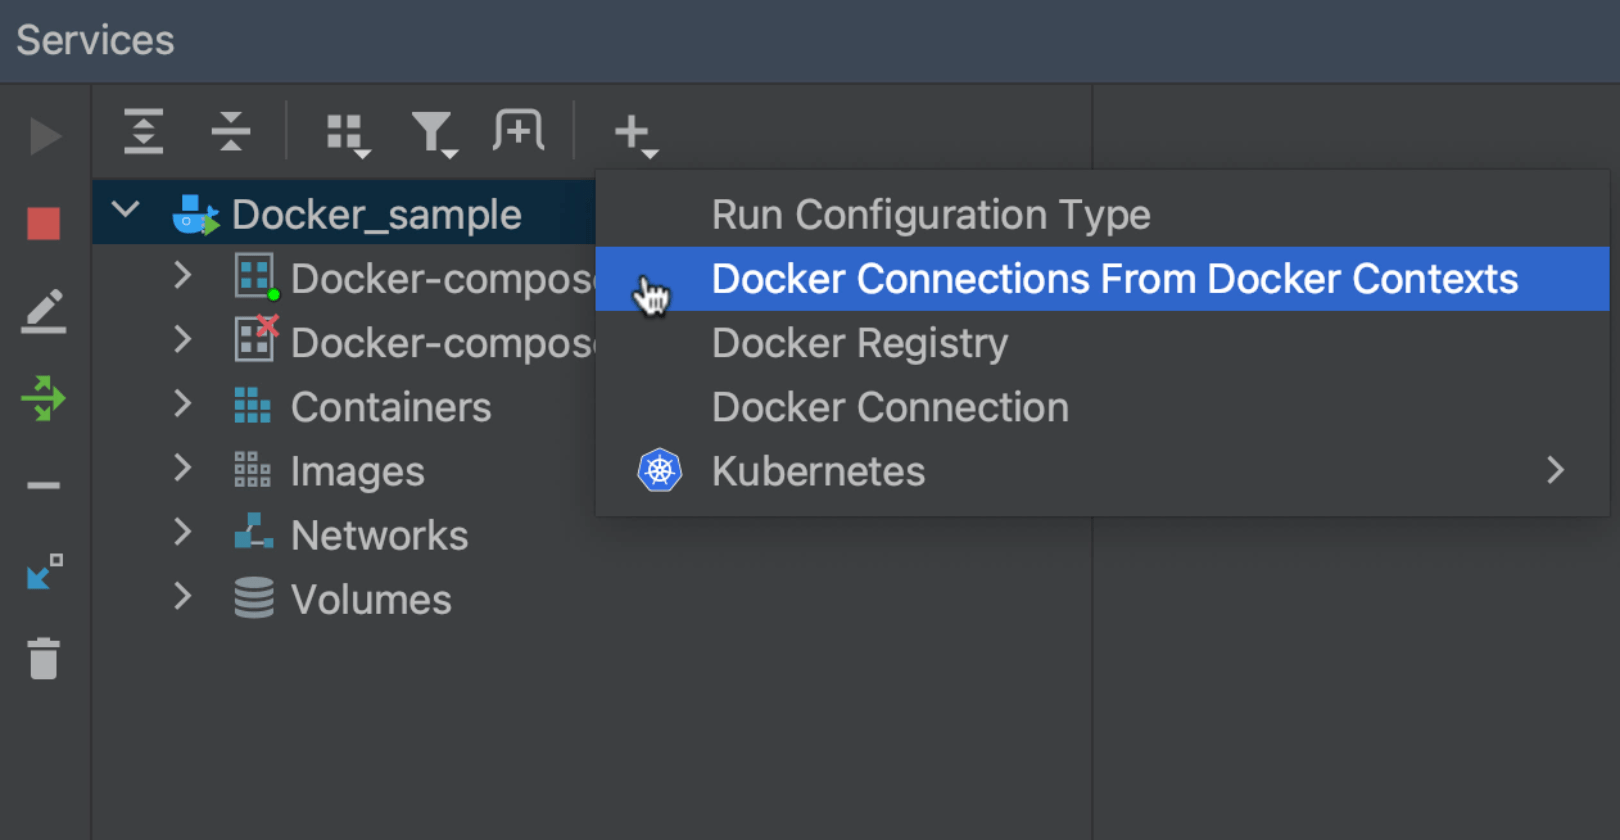 Docker connections from Docker Contexts